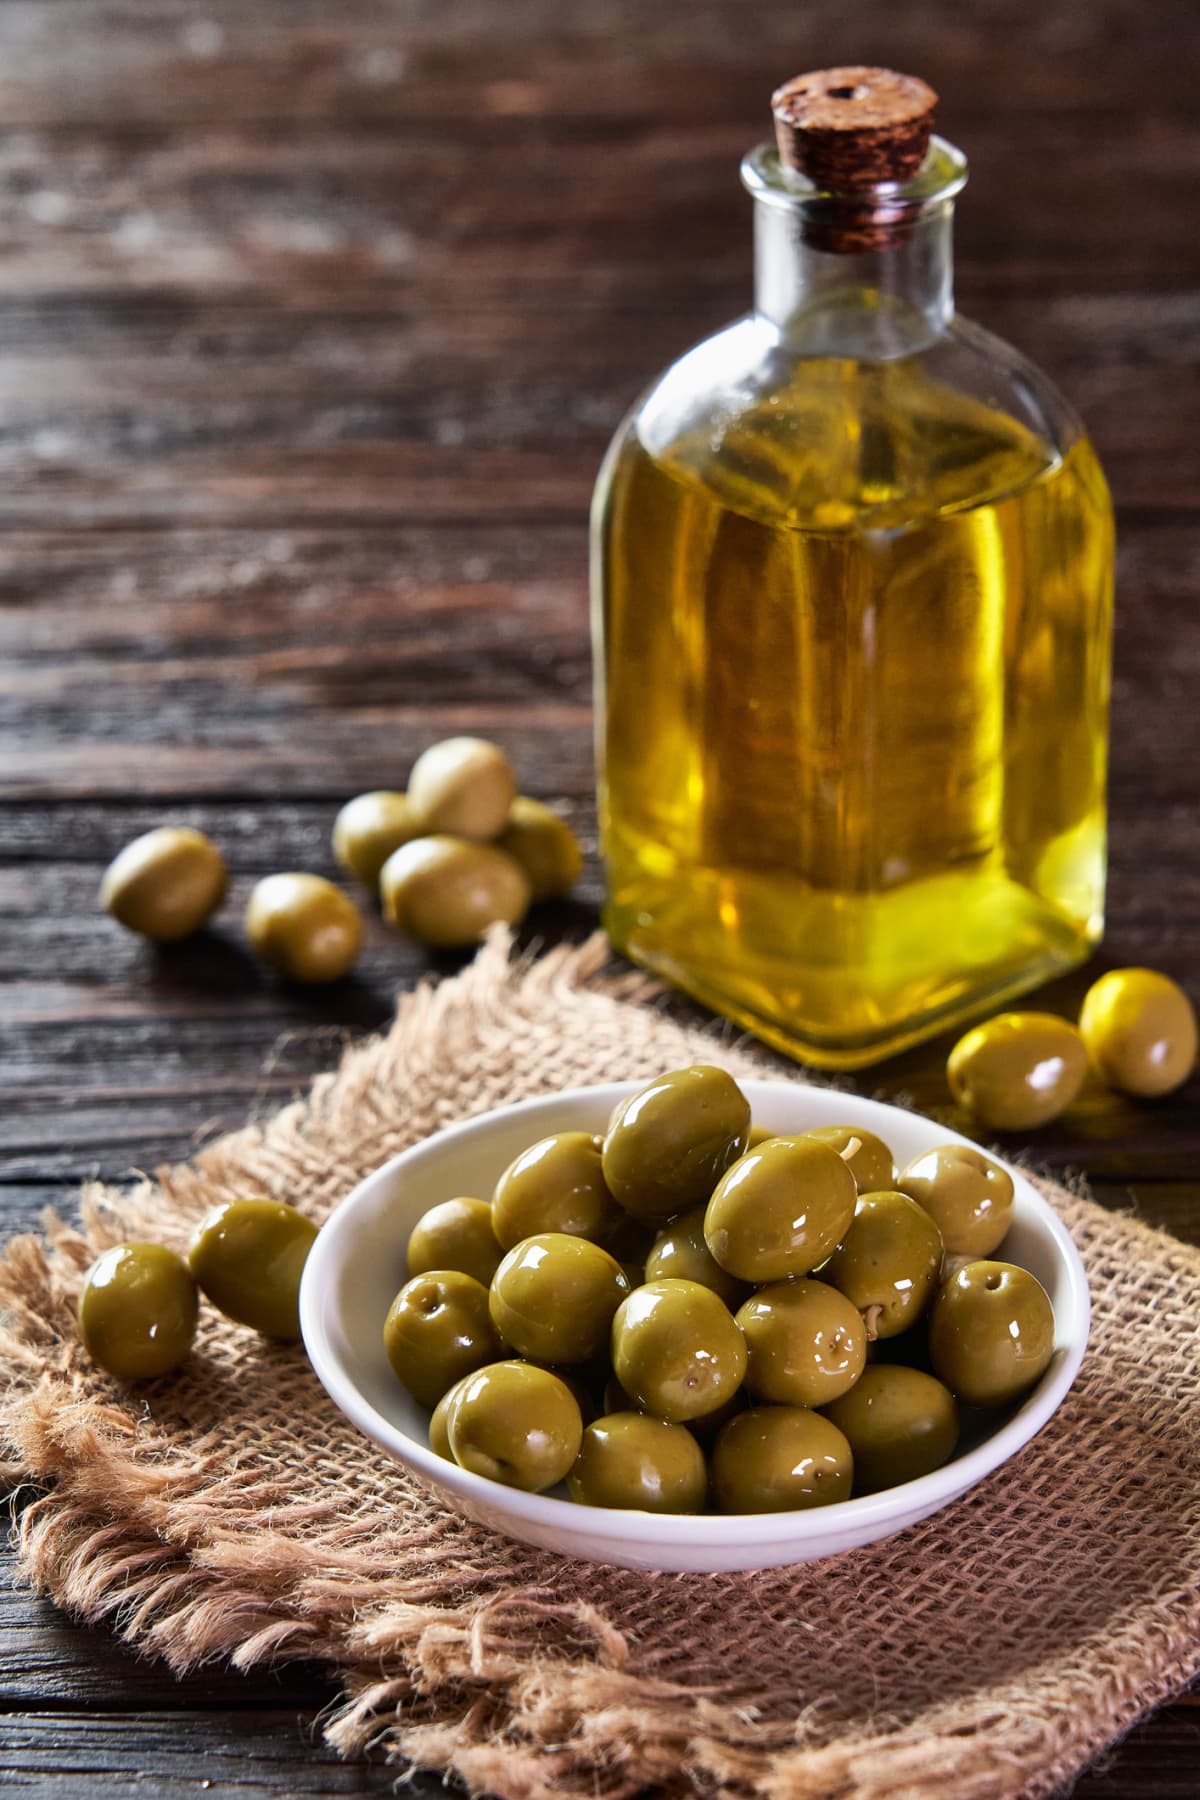 Olive oil bottle and green olives on a bowl on rustic wooden table